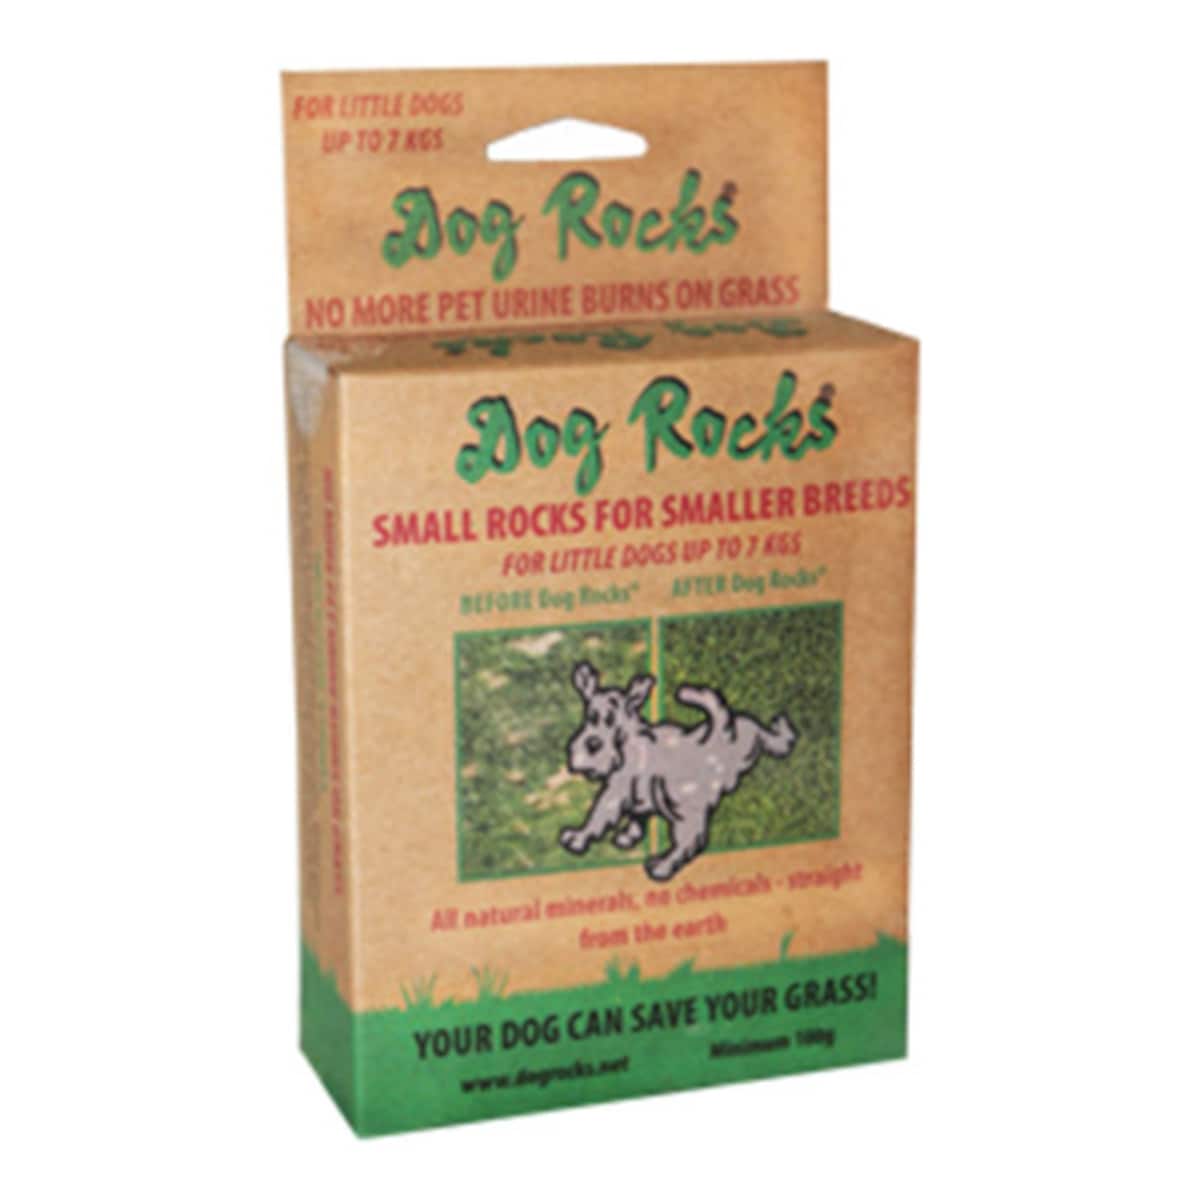 Dog Rocks Lawn Protector for Small Dogs up to 7kg 100g